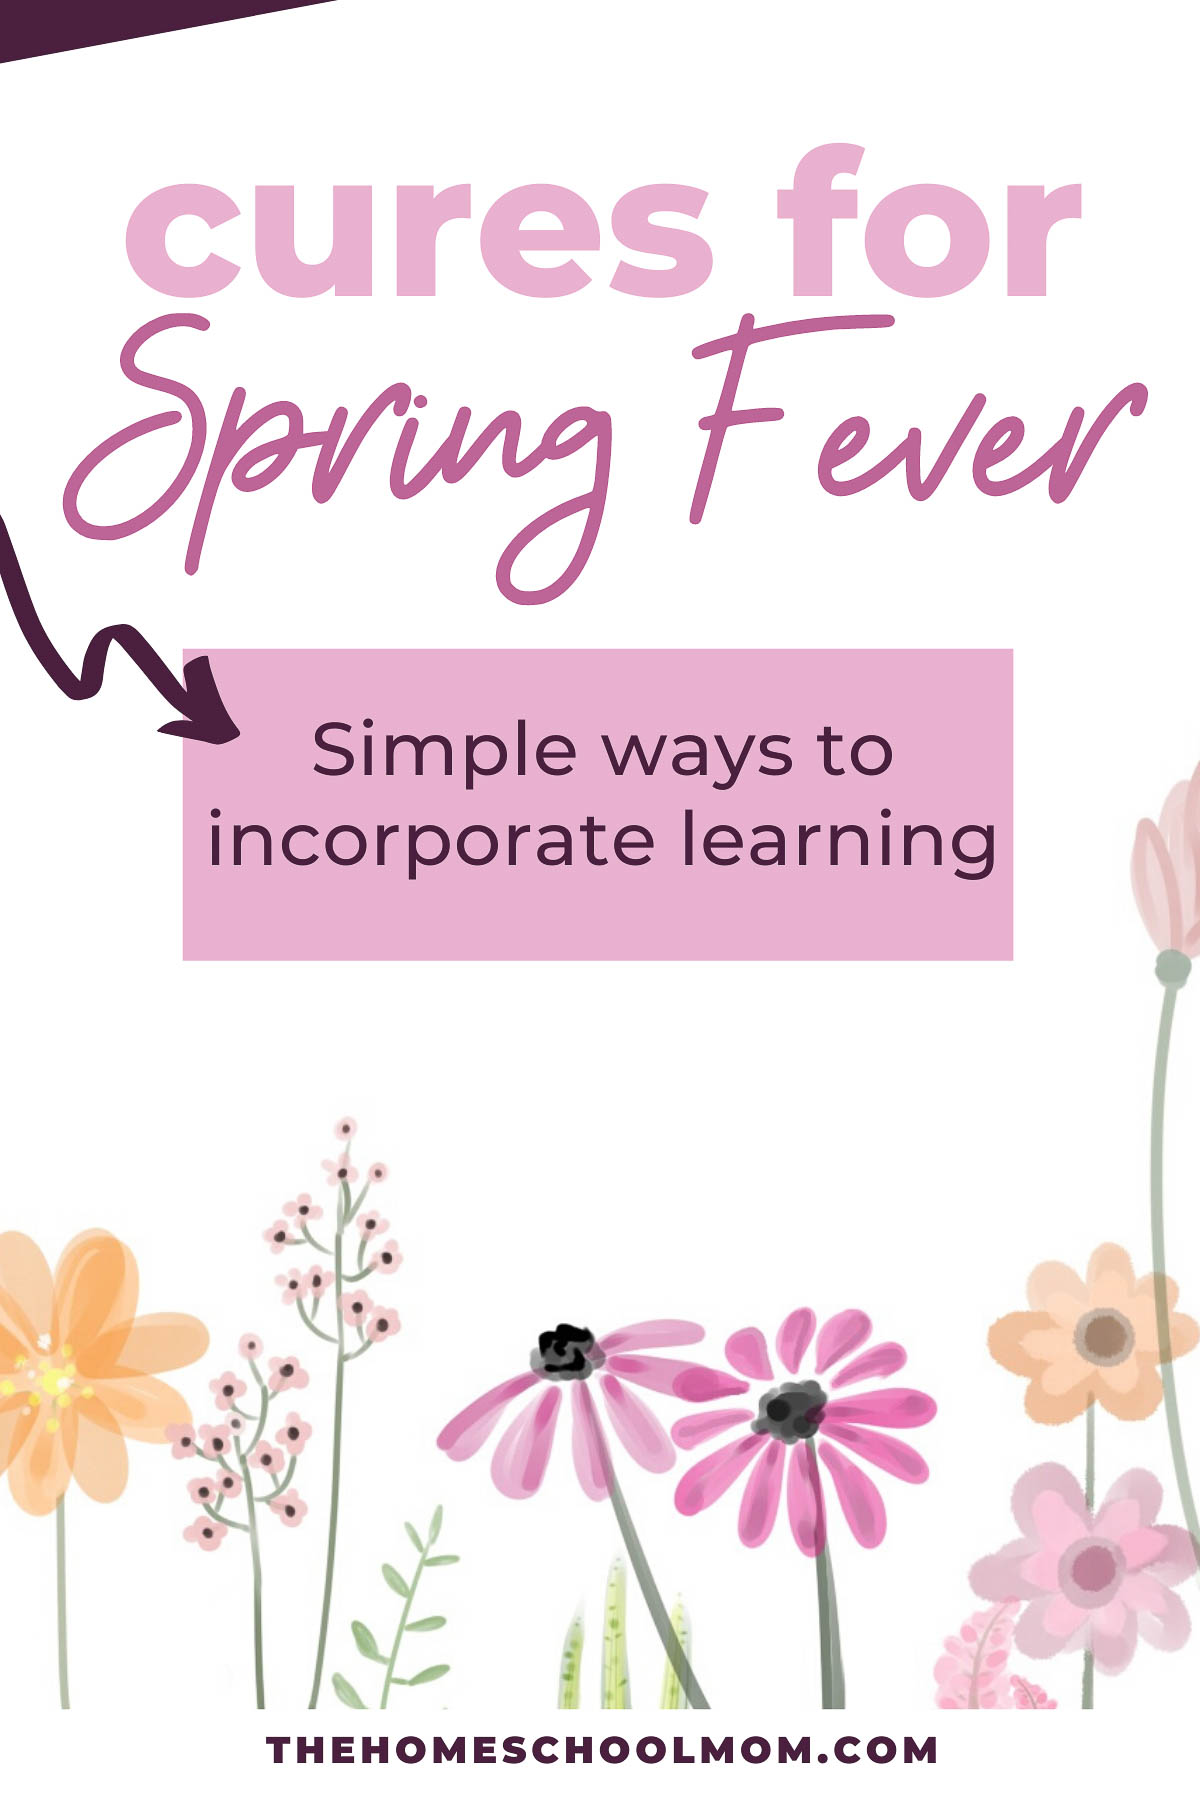 Illustration of spring flowers with text Cures for Spring Fever - Simple ways to incorporate learning - TheHomeSchoolMom.com